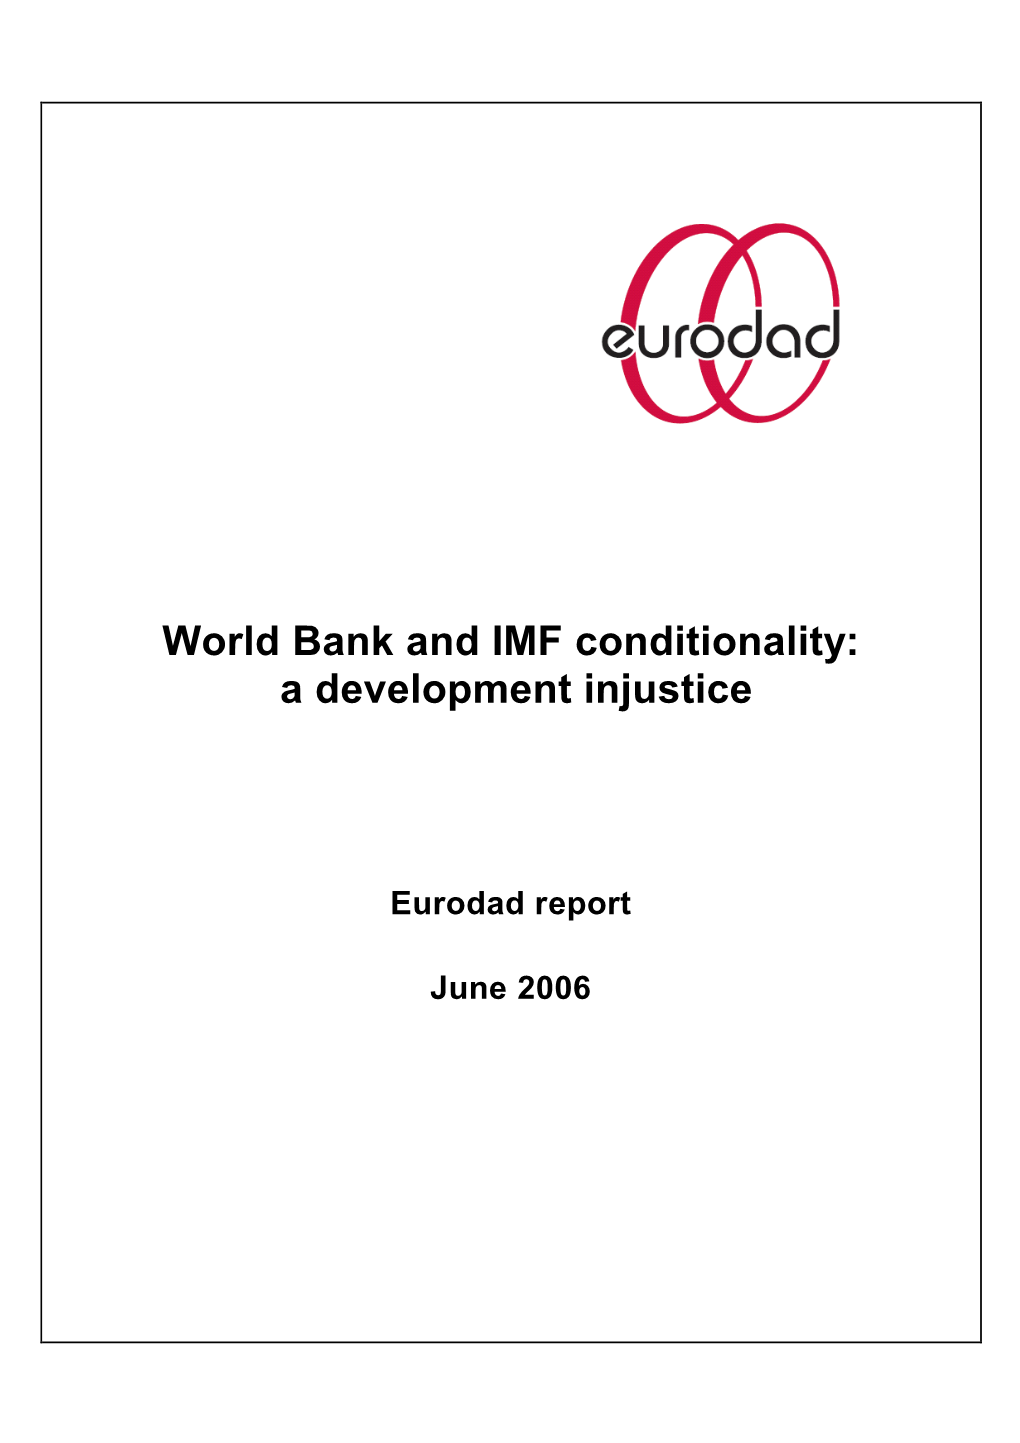 World Bank and IMF Conditionality: a Development Injustice